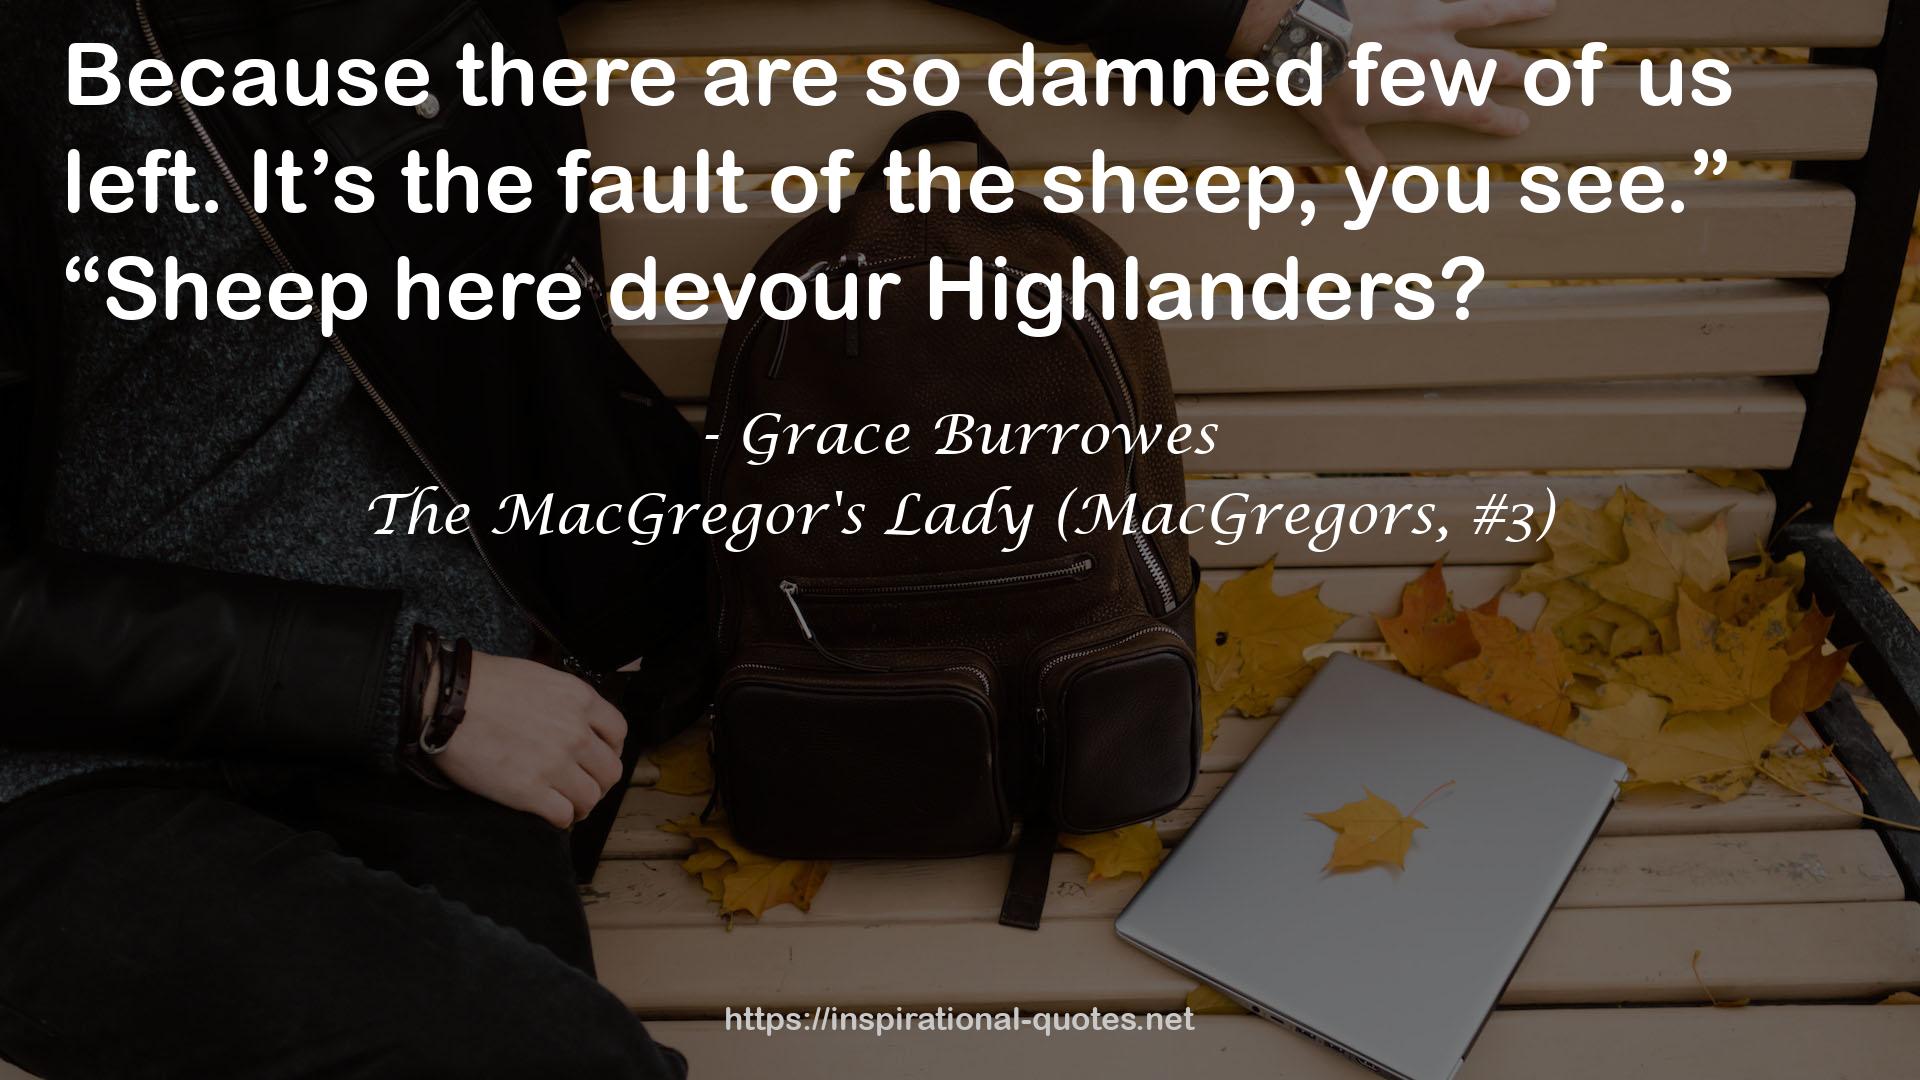 The MacGregor's Lady (MacGregors, #3) QUOTES